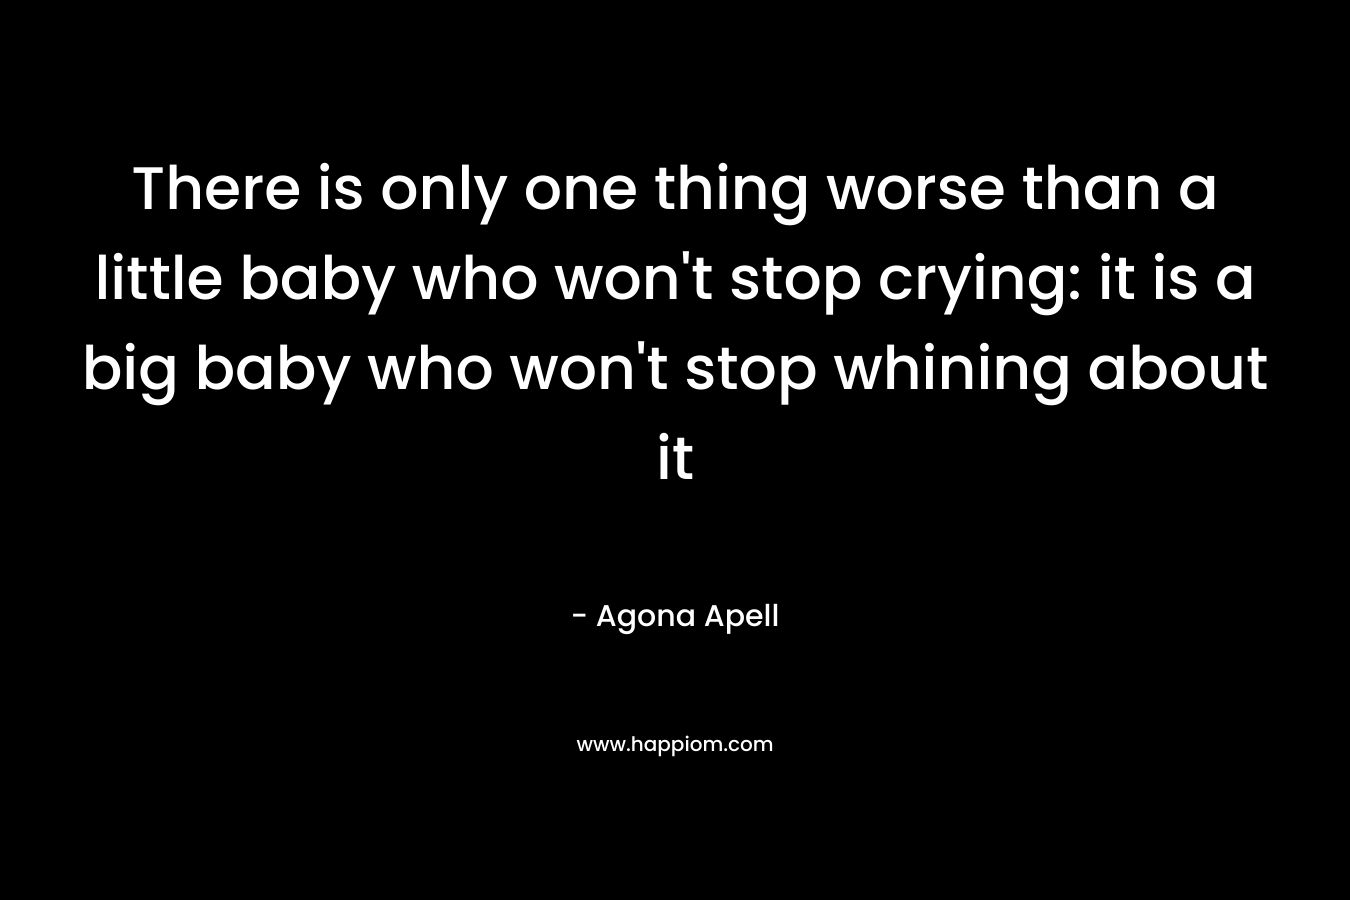 There is only one thing worse than a little baby who won't stop crying: it is a big baby who won't stop whining about it